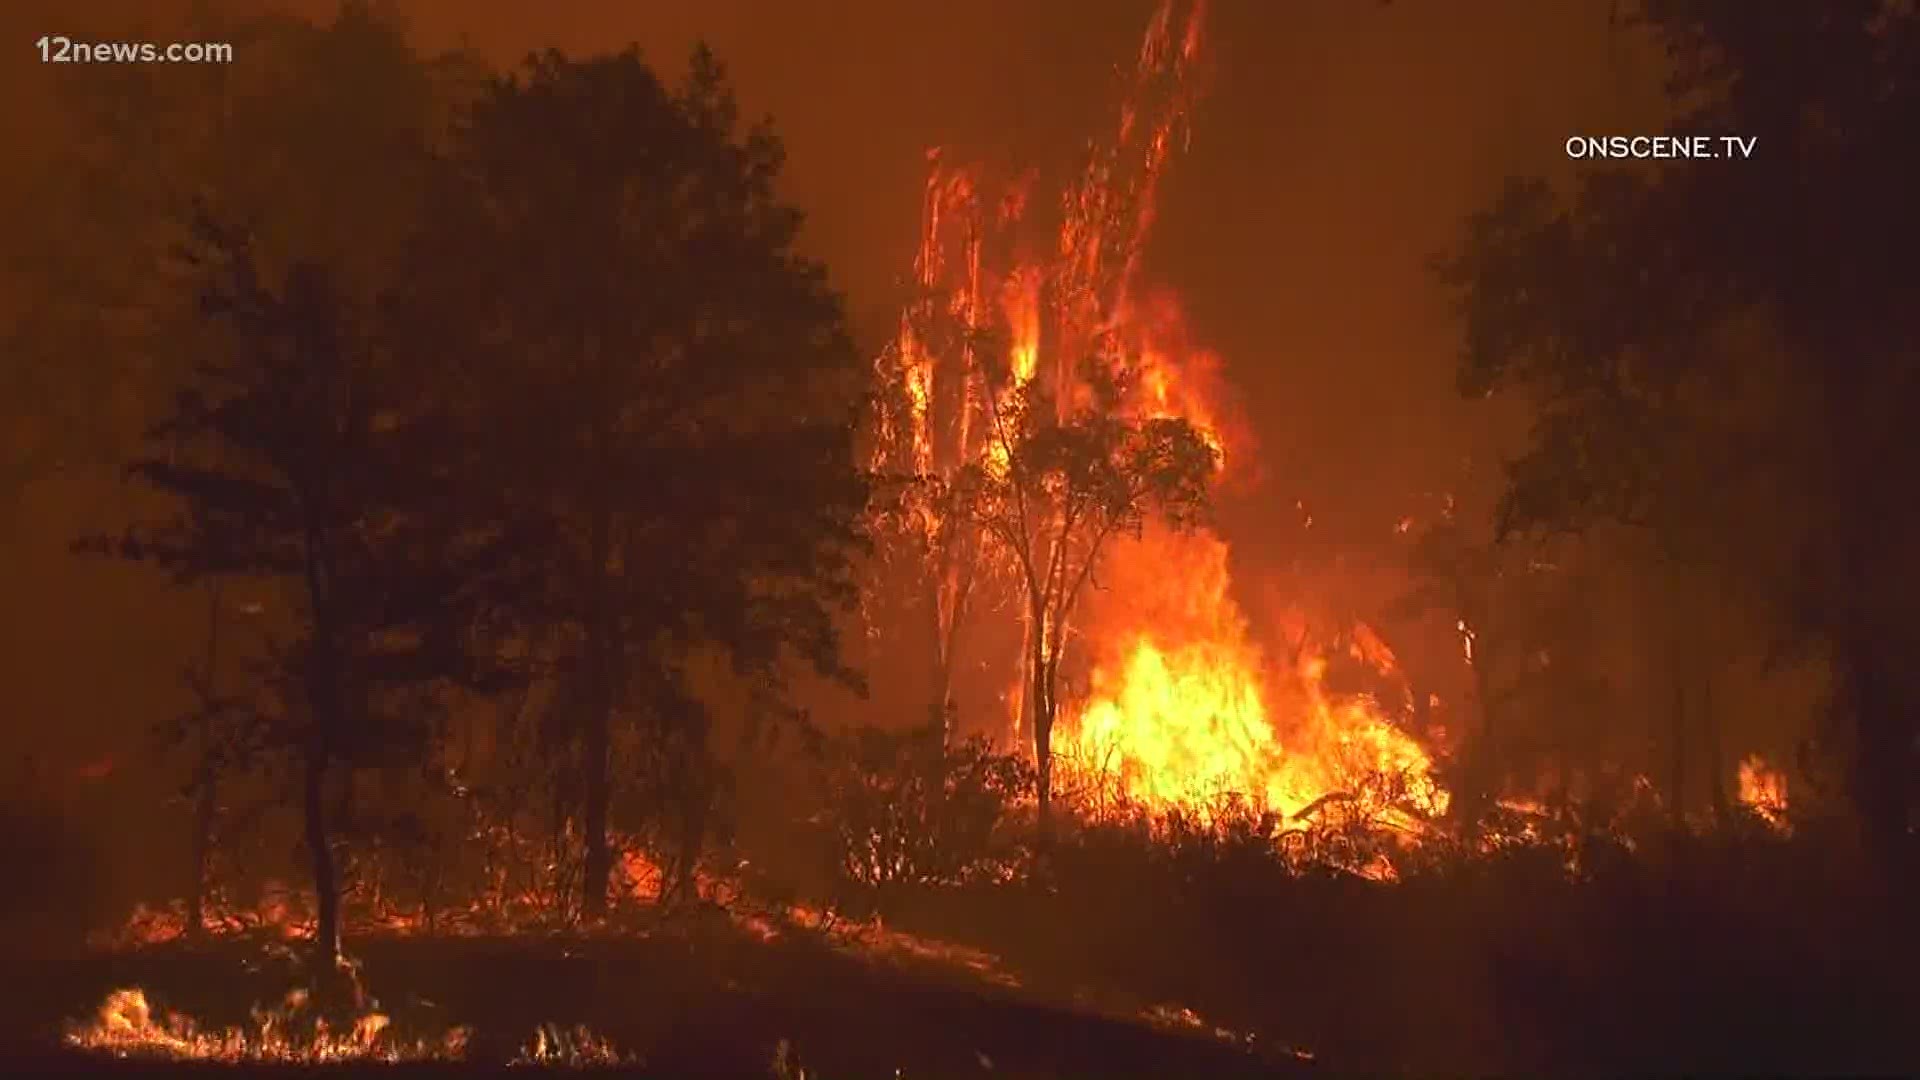 More than 40 wildfires are burning in California and more than 30 crews from Arizona are helping fight them.